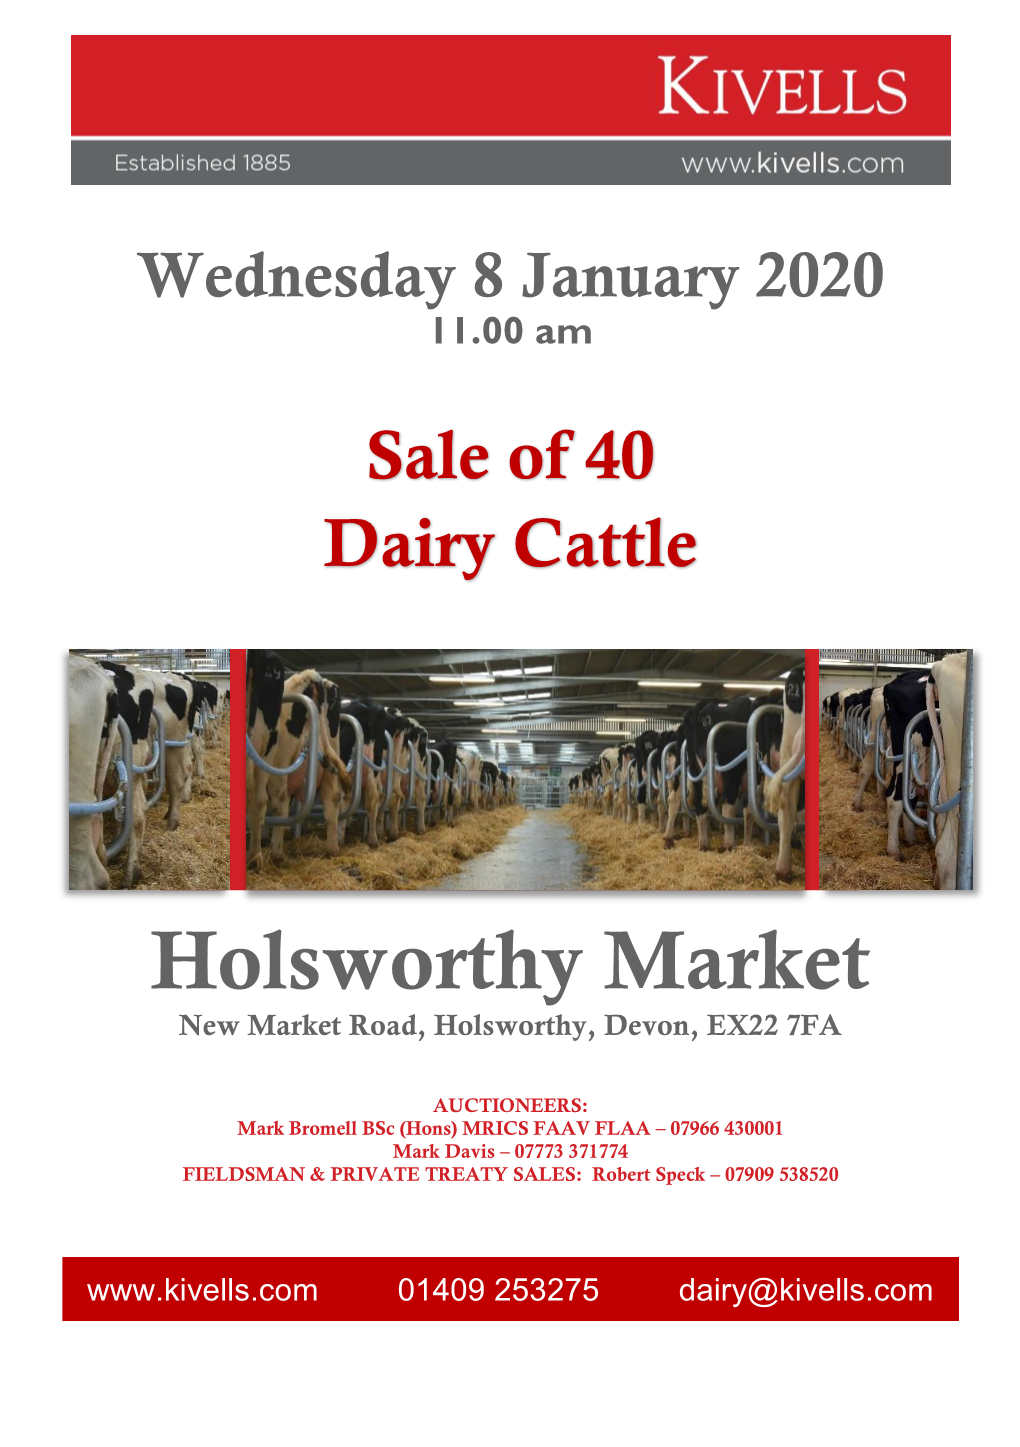 Sale of 40 Dairy Cattle